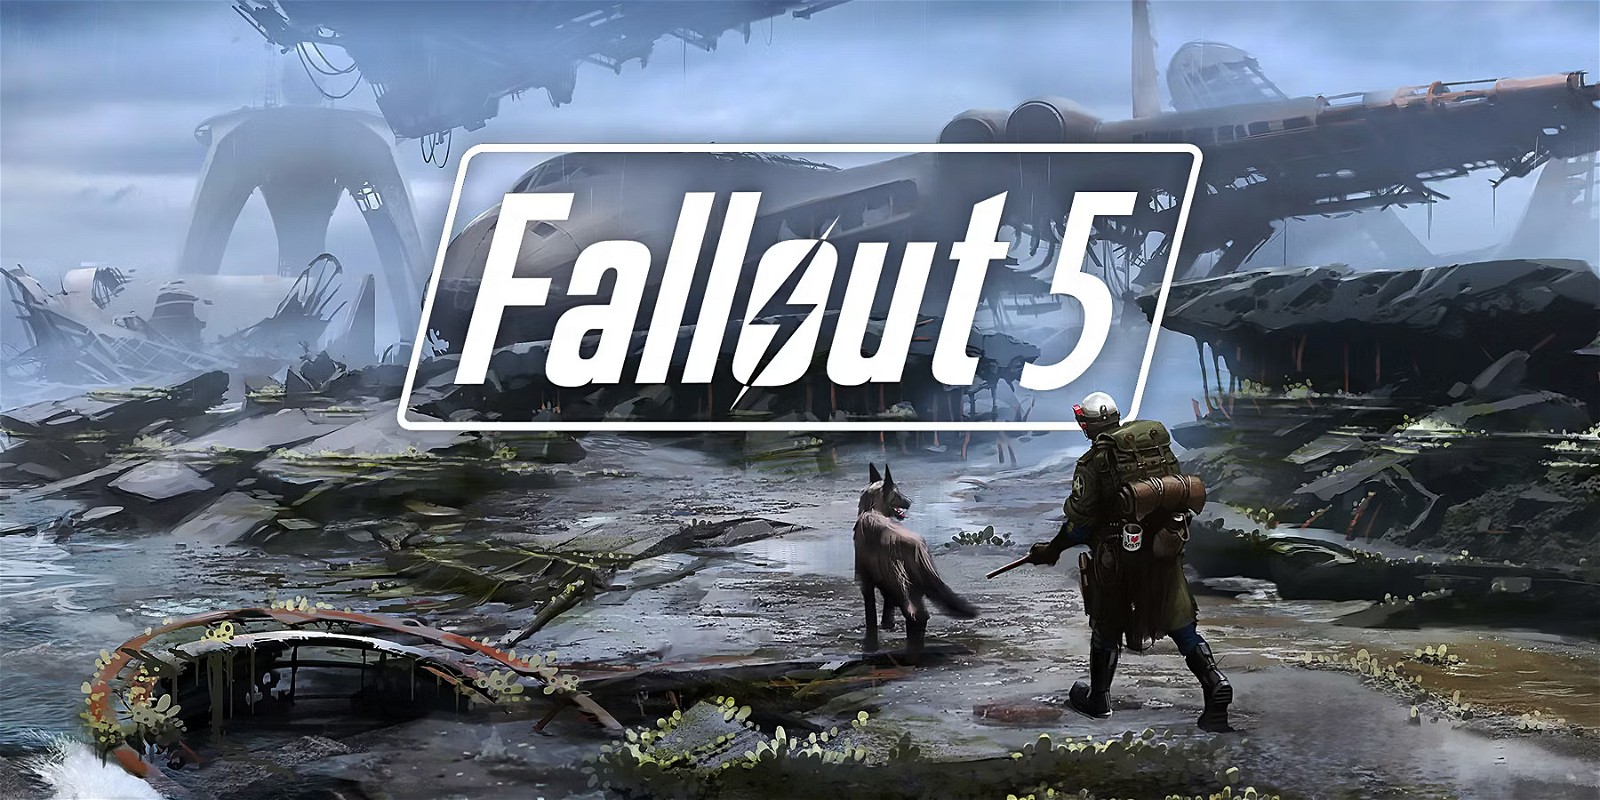 Fallout 5 is very much coming. Maybe not in this decade though.